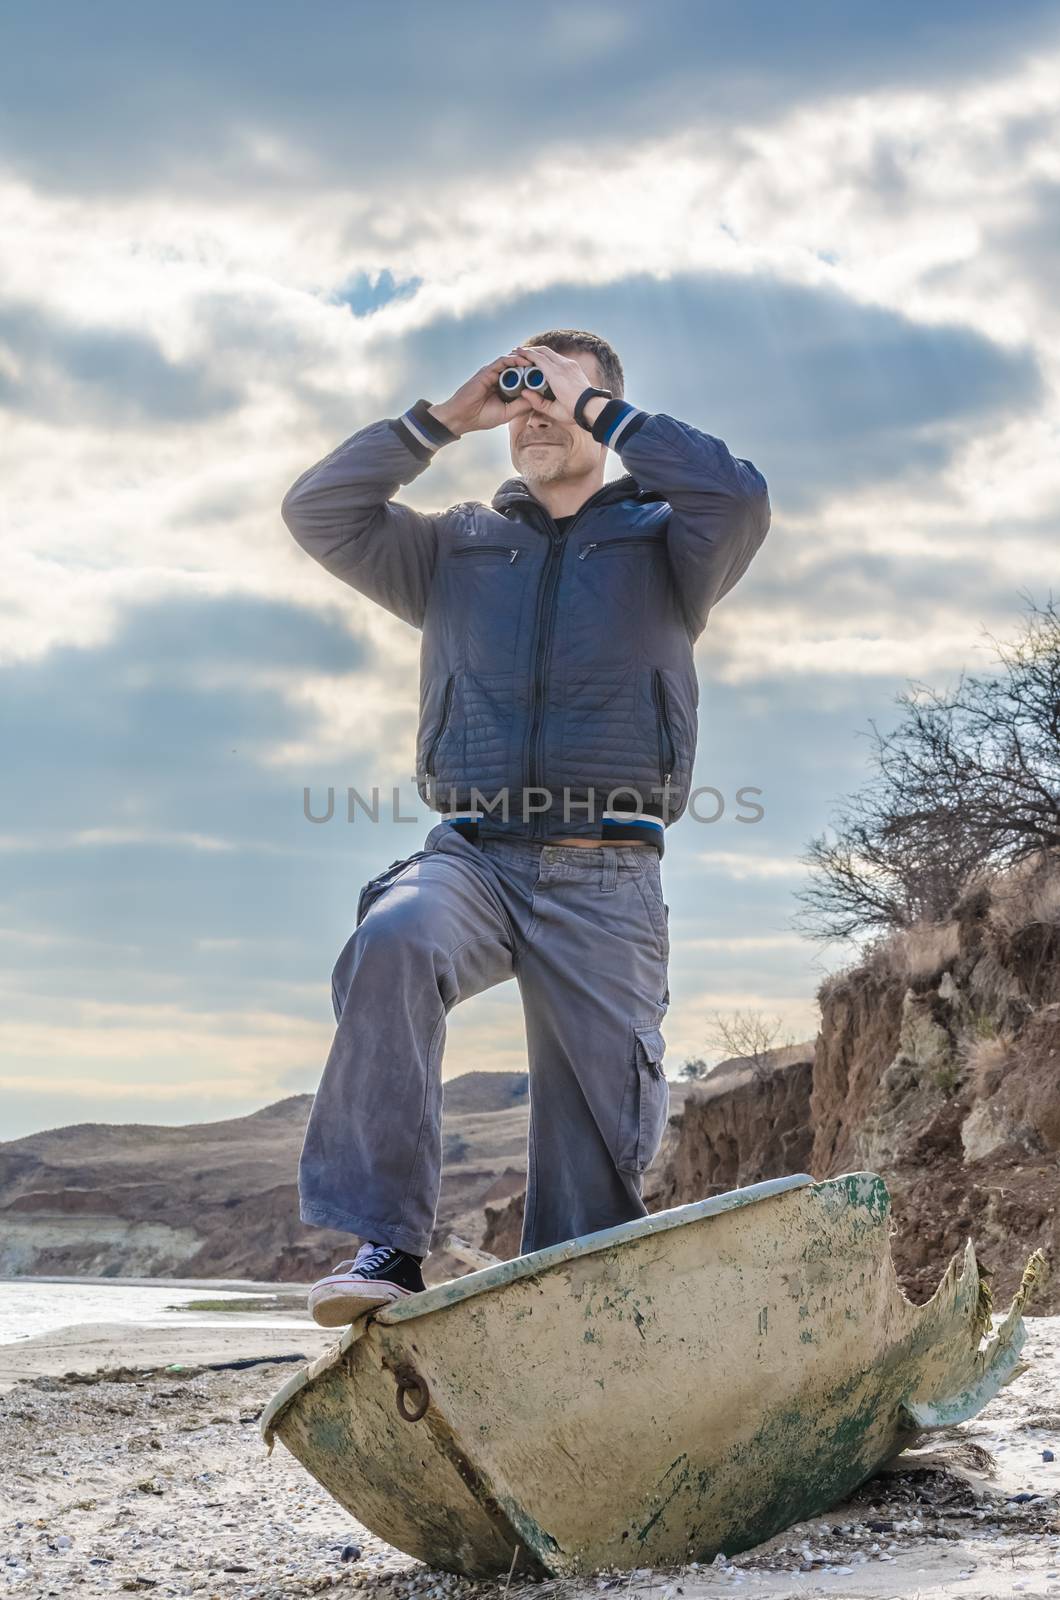 man in black stands in a broken boat on the beach and carefully looks through binoculars